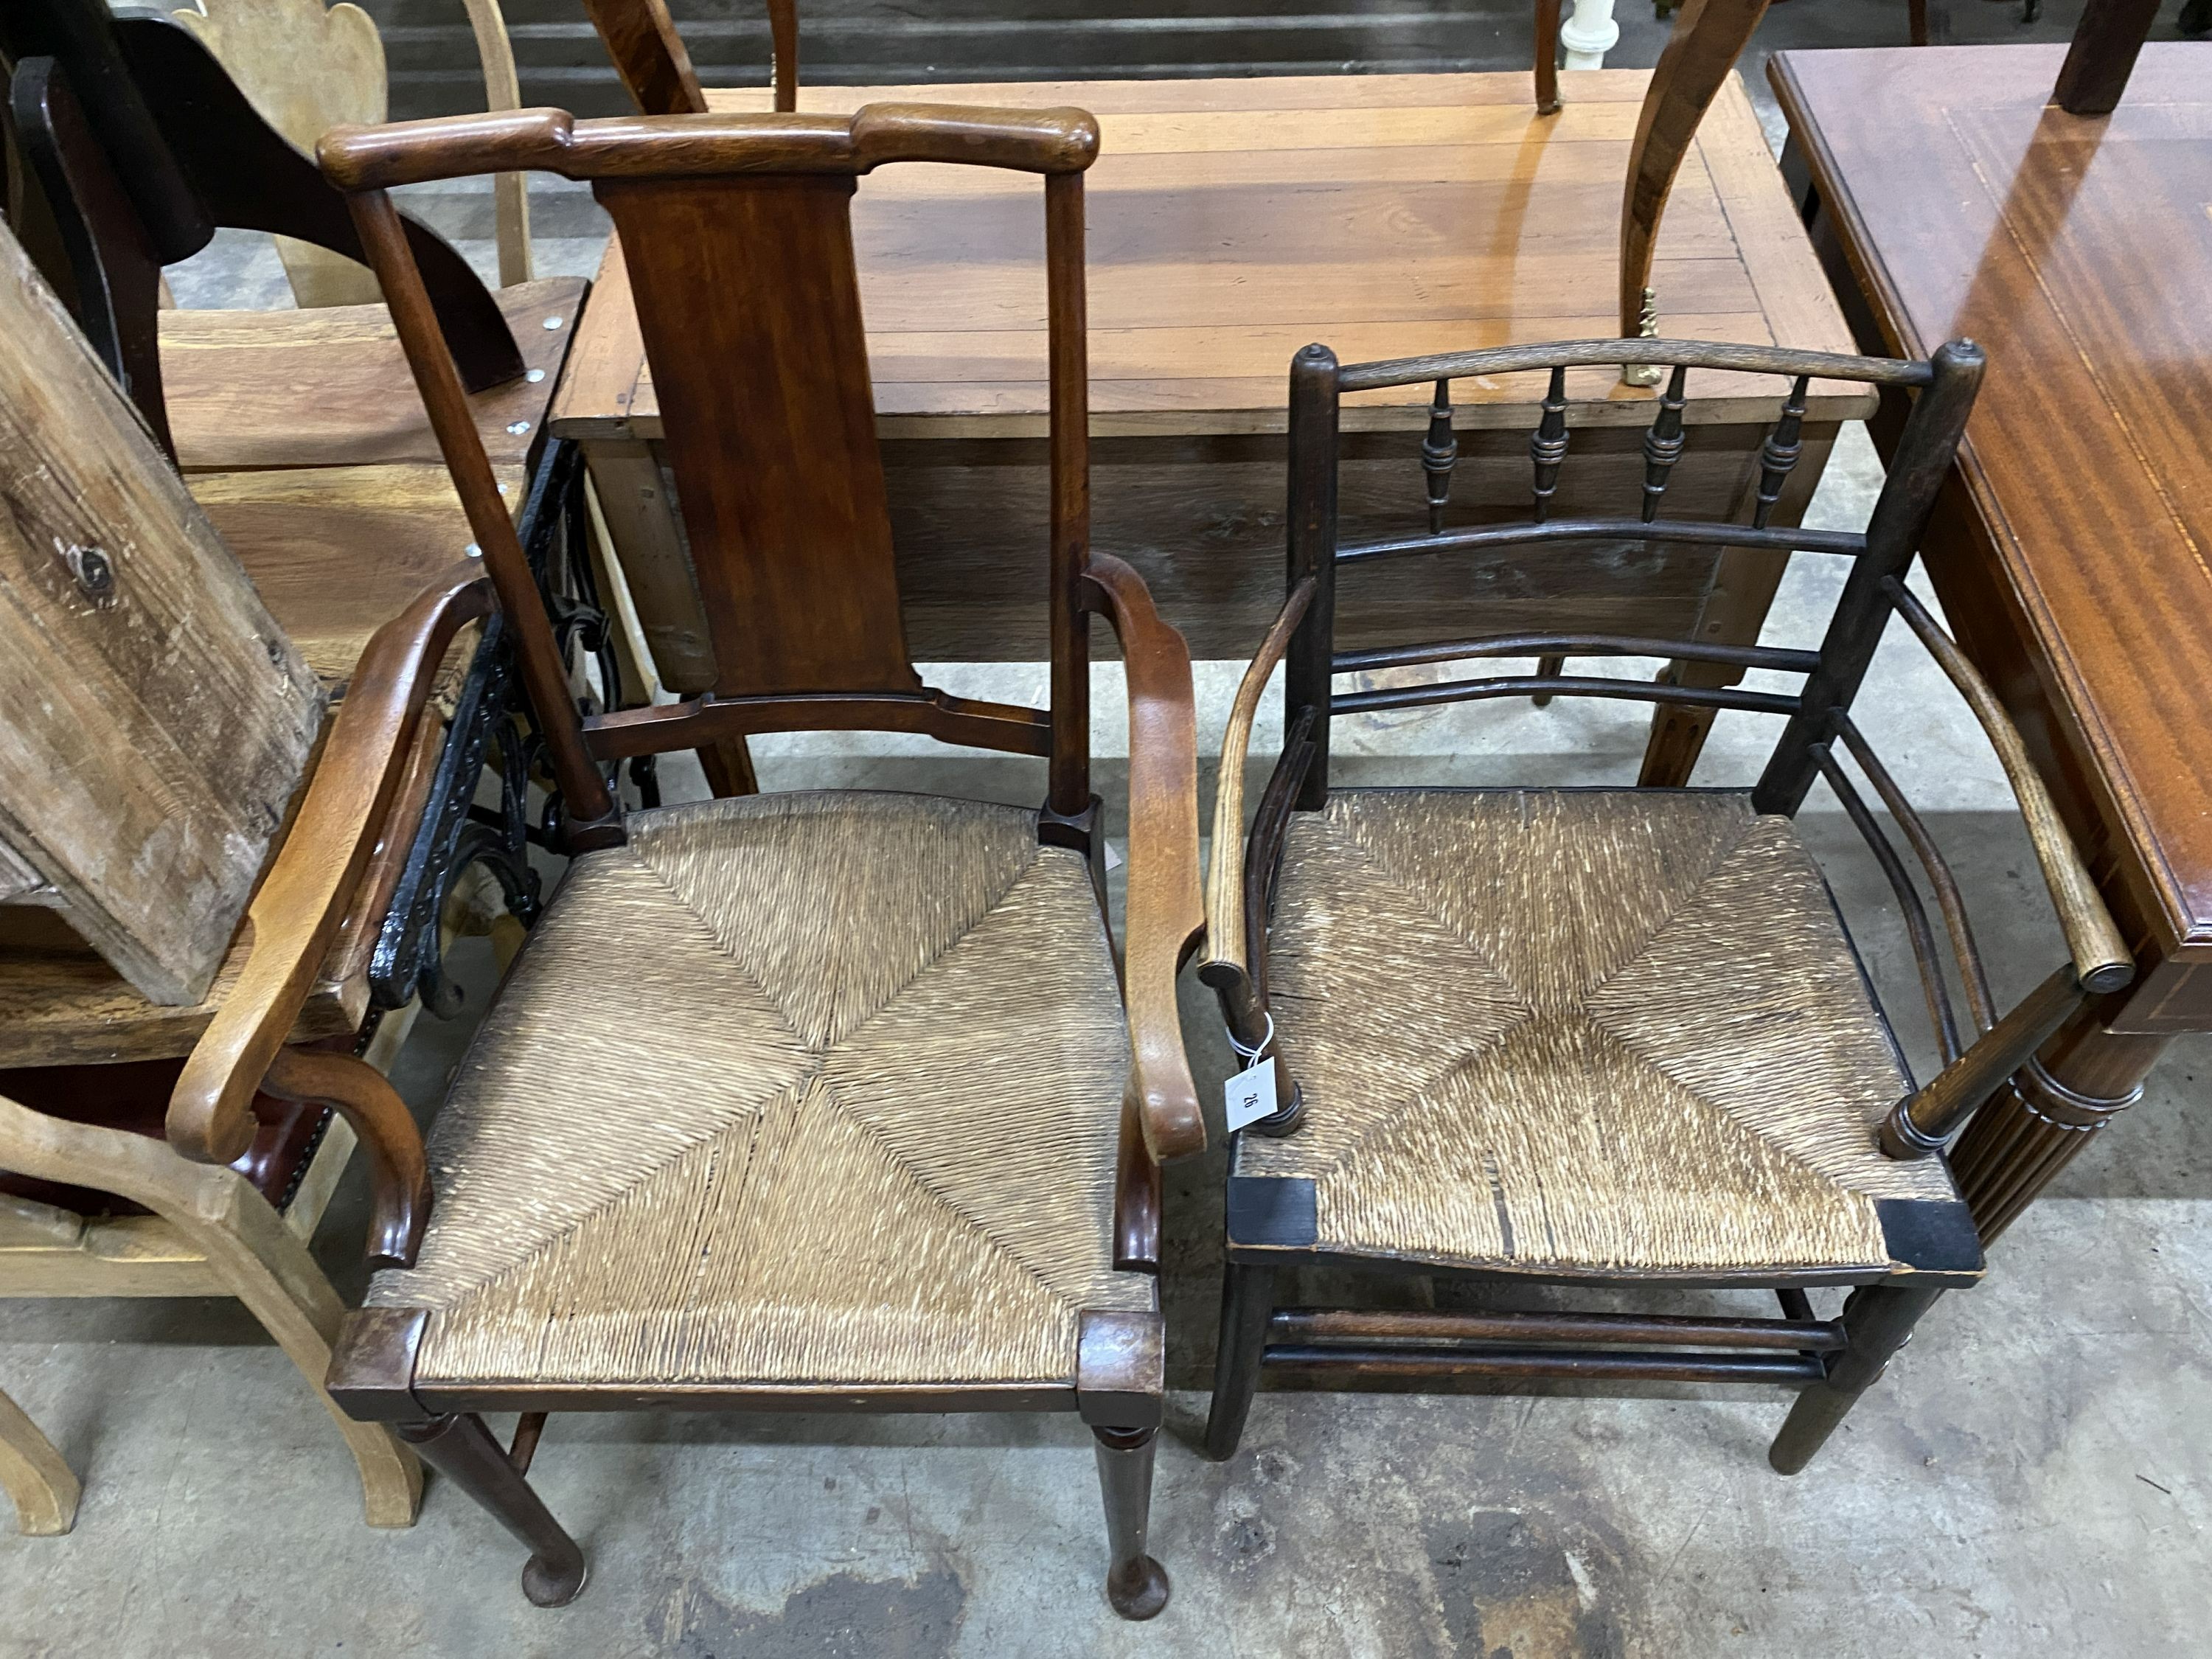 A 19th century ash Sussex chair and an Arts & Crafts rush seat chair, designed by Norman Shaw